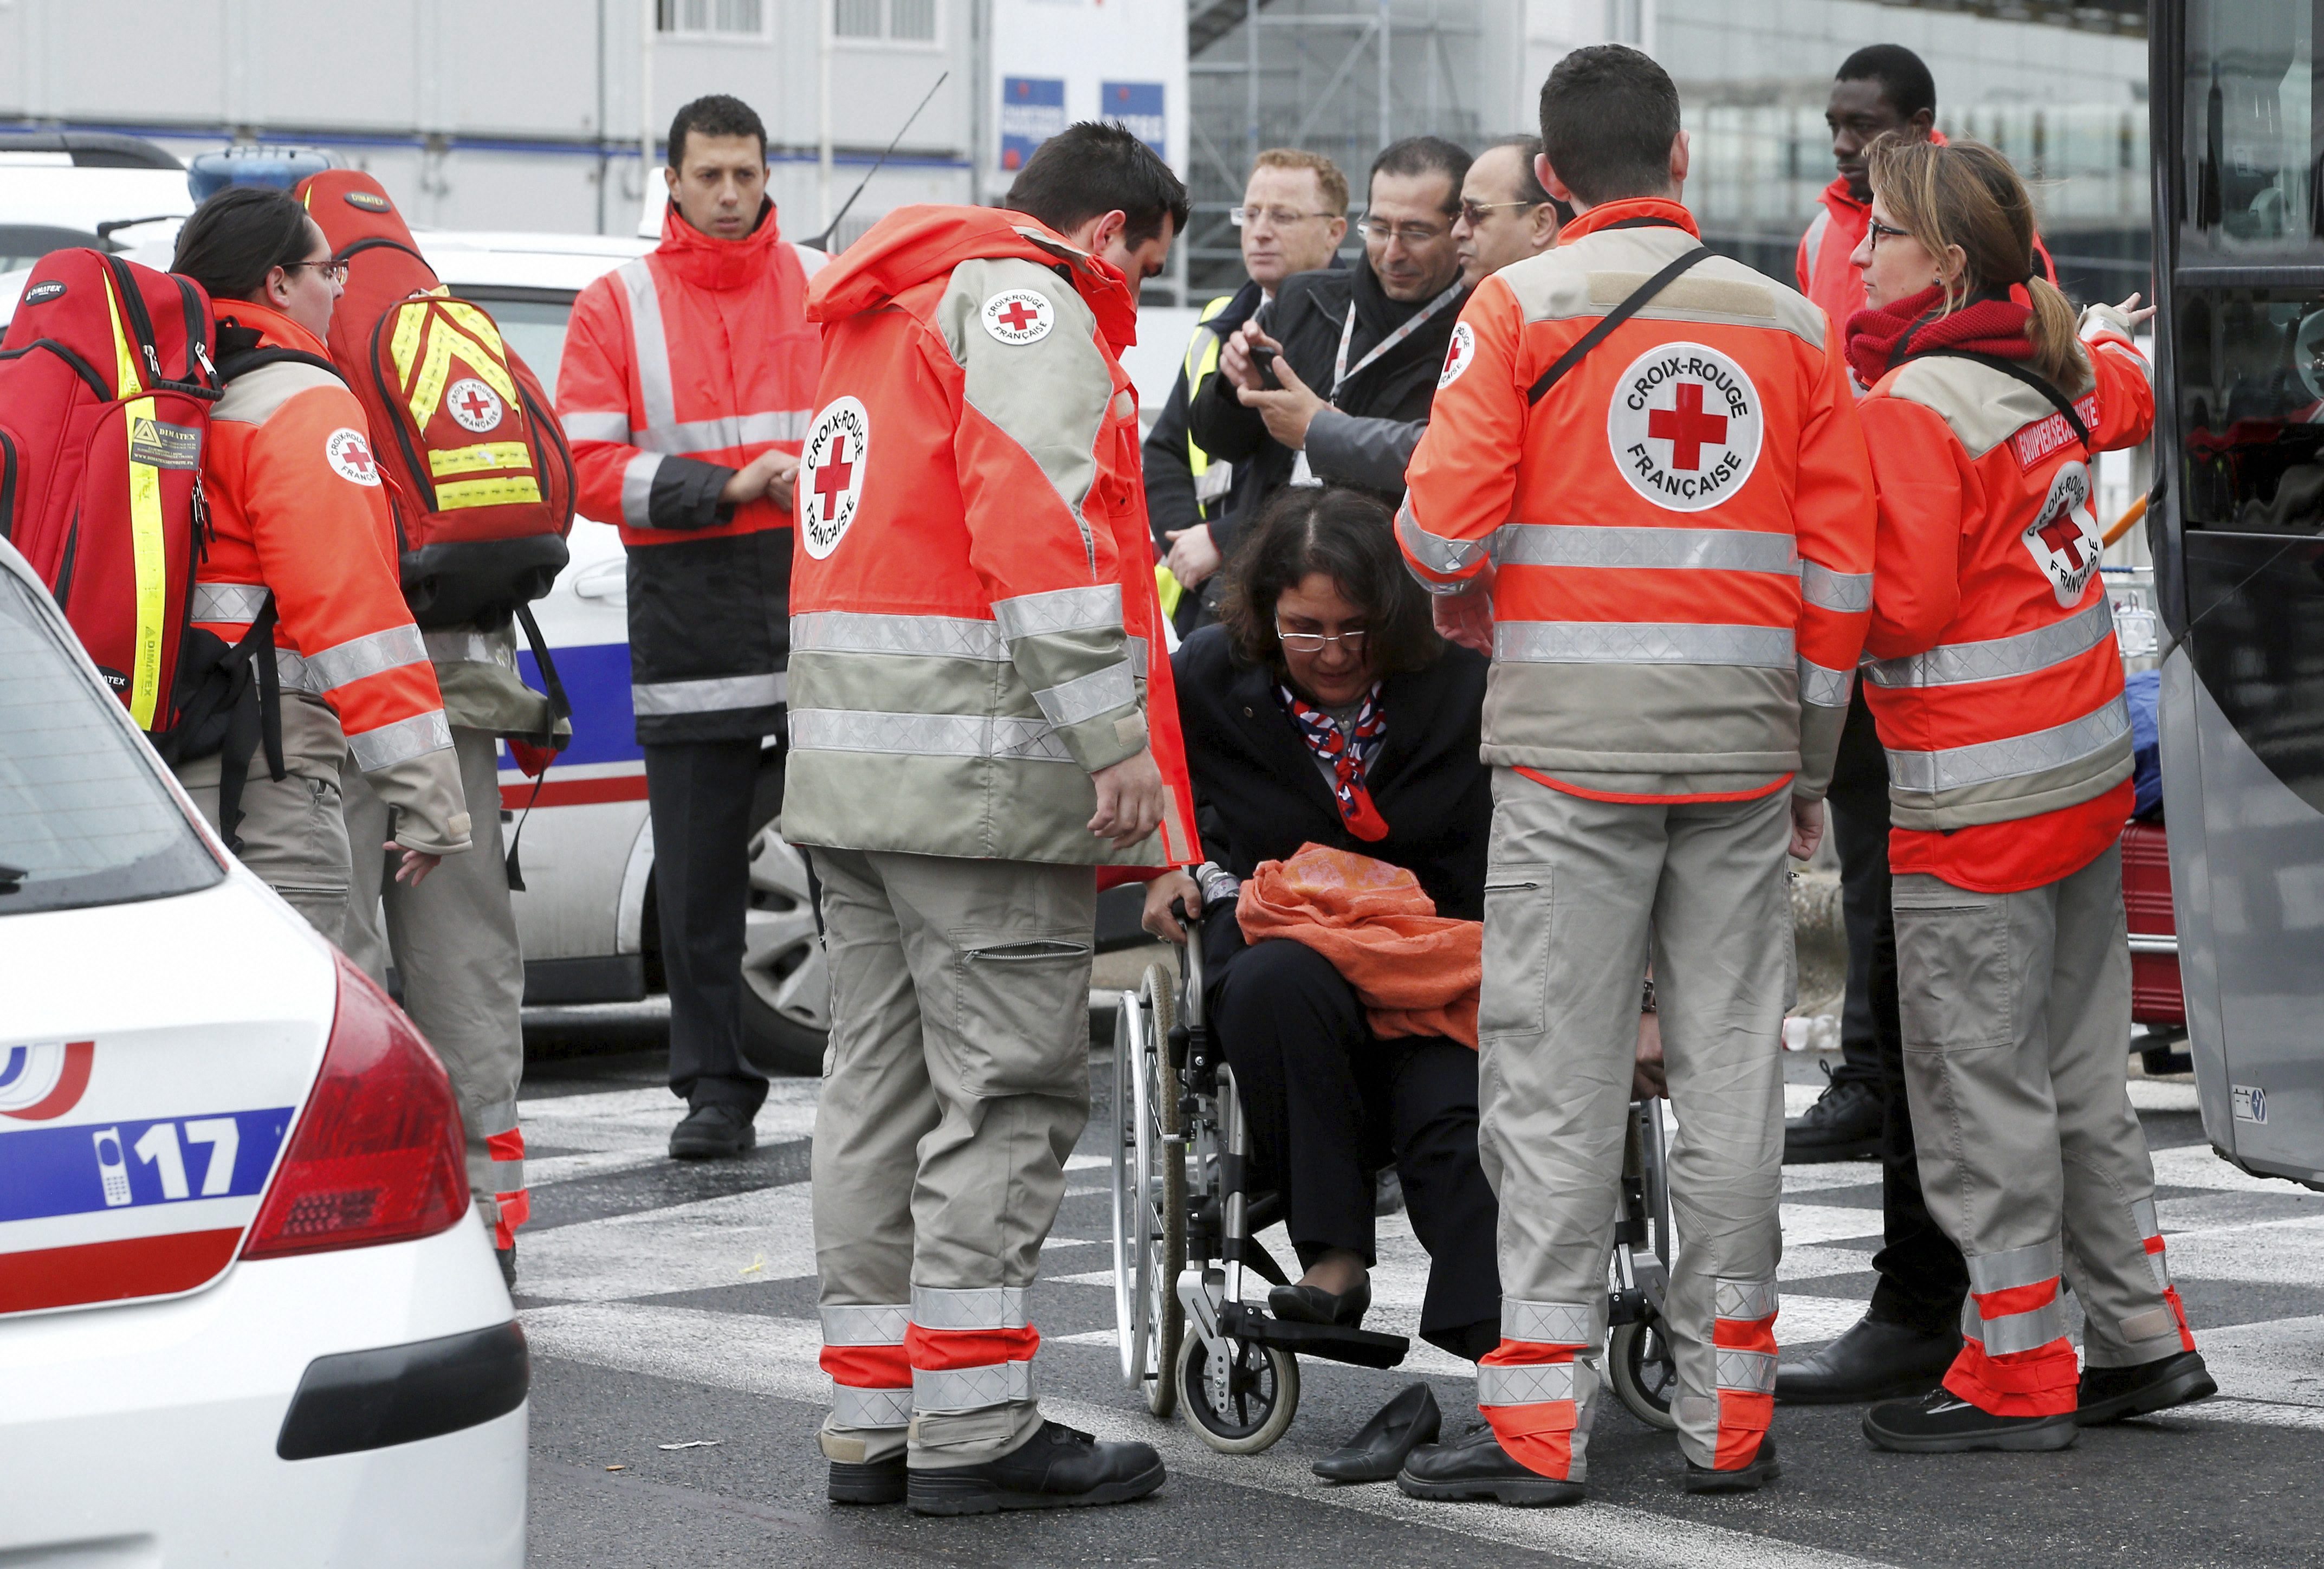 In pictures: Shooting at Paris Orly airport